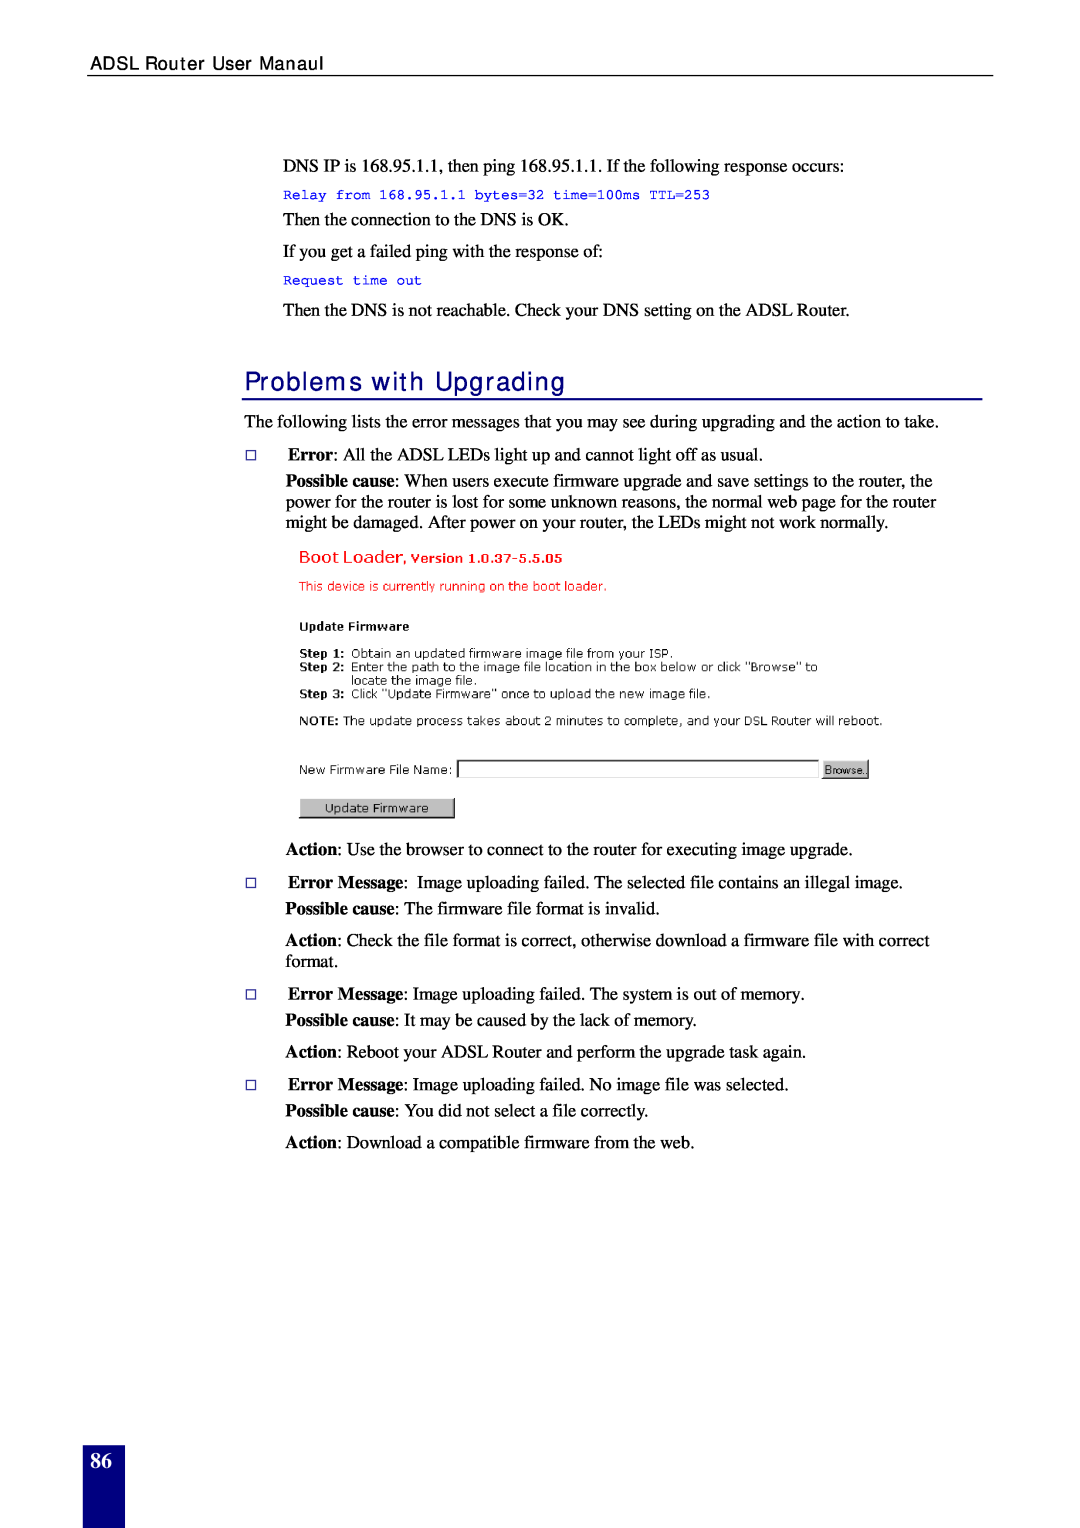 Dynalink RTA770W user manual Problems with Upgrading, ADSL Router User Manaul 